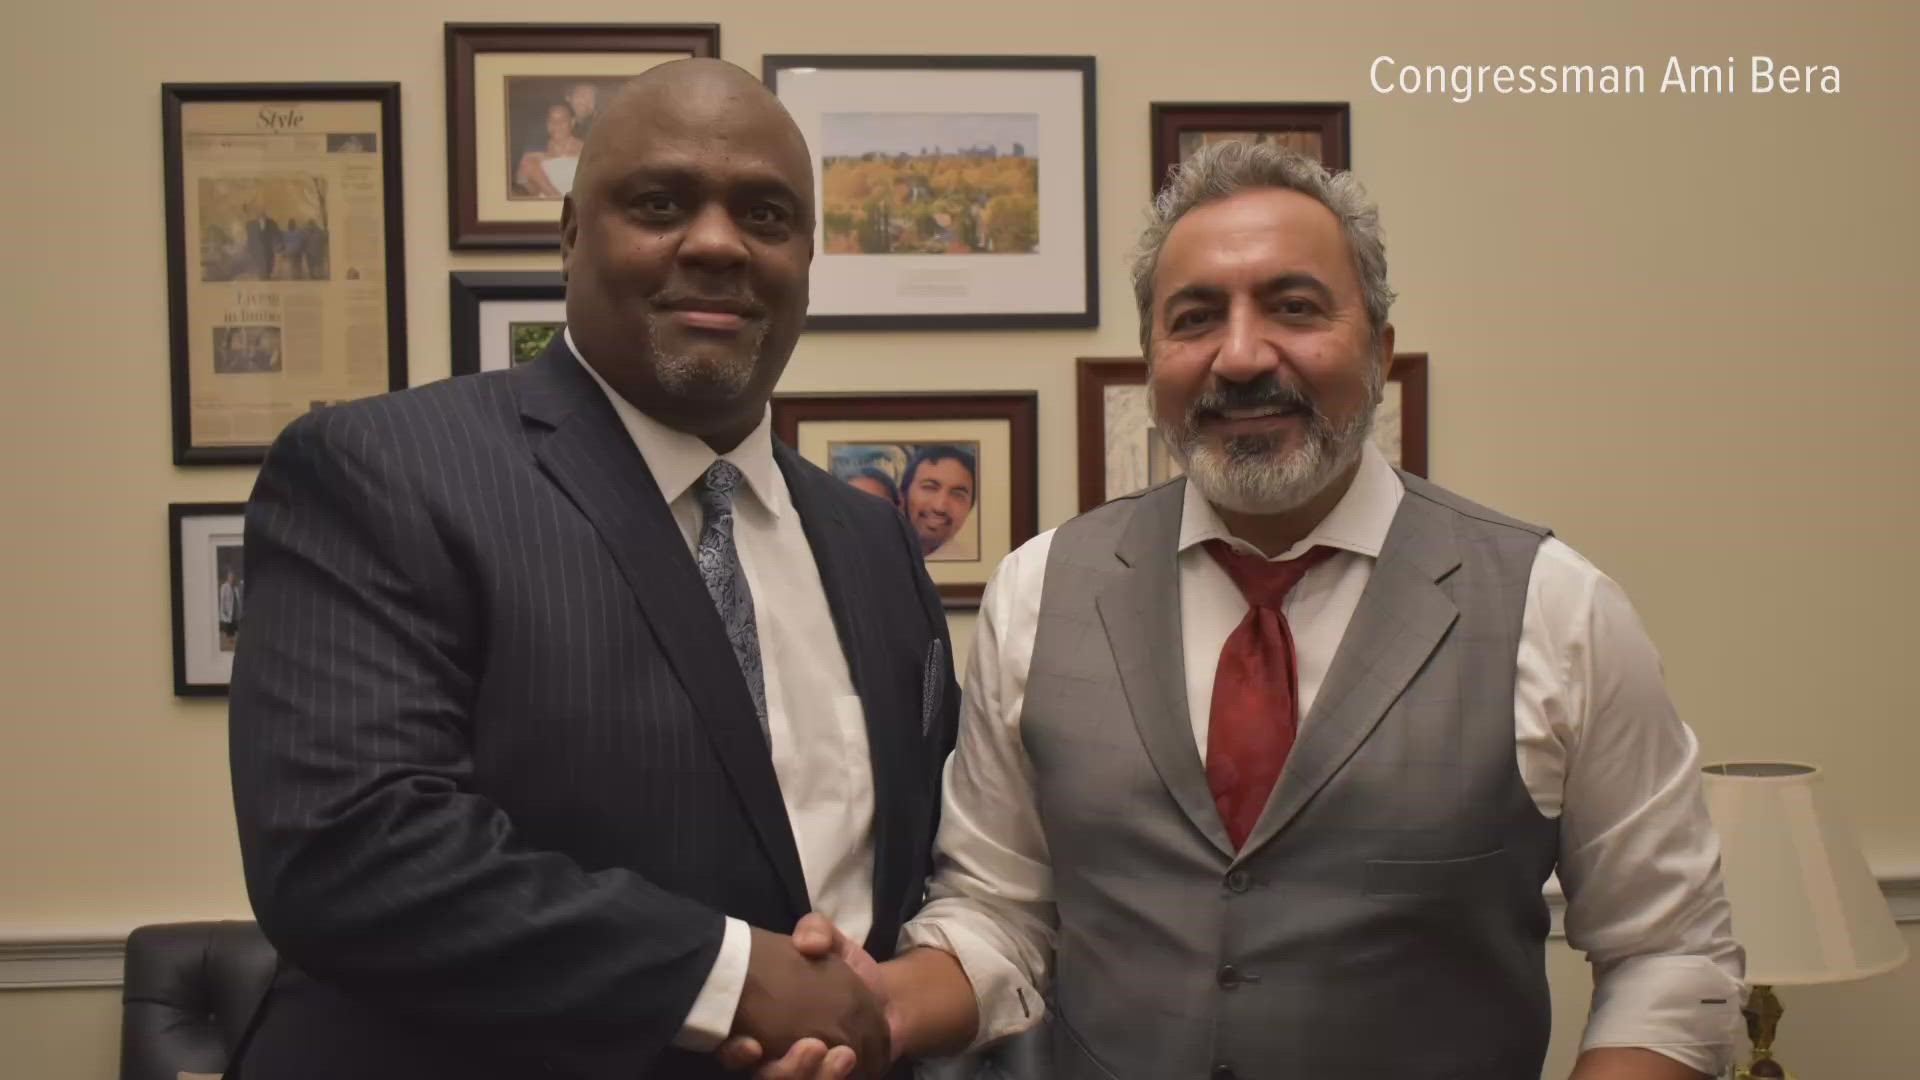 Making the most of his second chance, Mervin Brookins hopes his message to Congress can inspire change after he attended the State of the Union with Rep. Ami Bera.